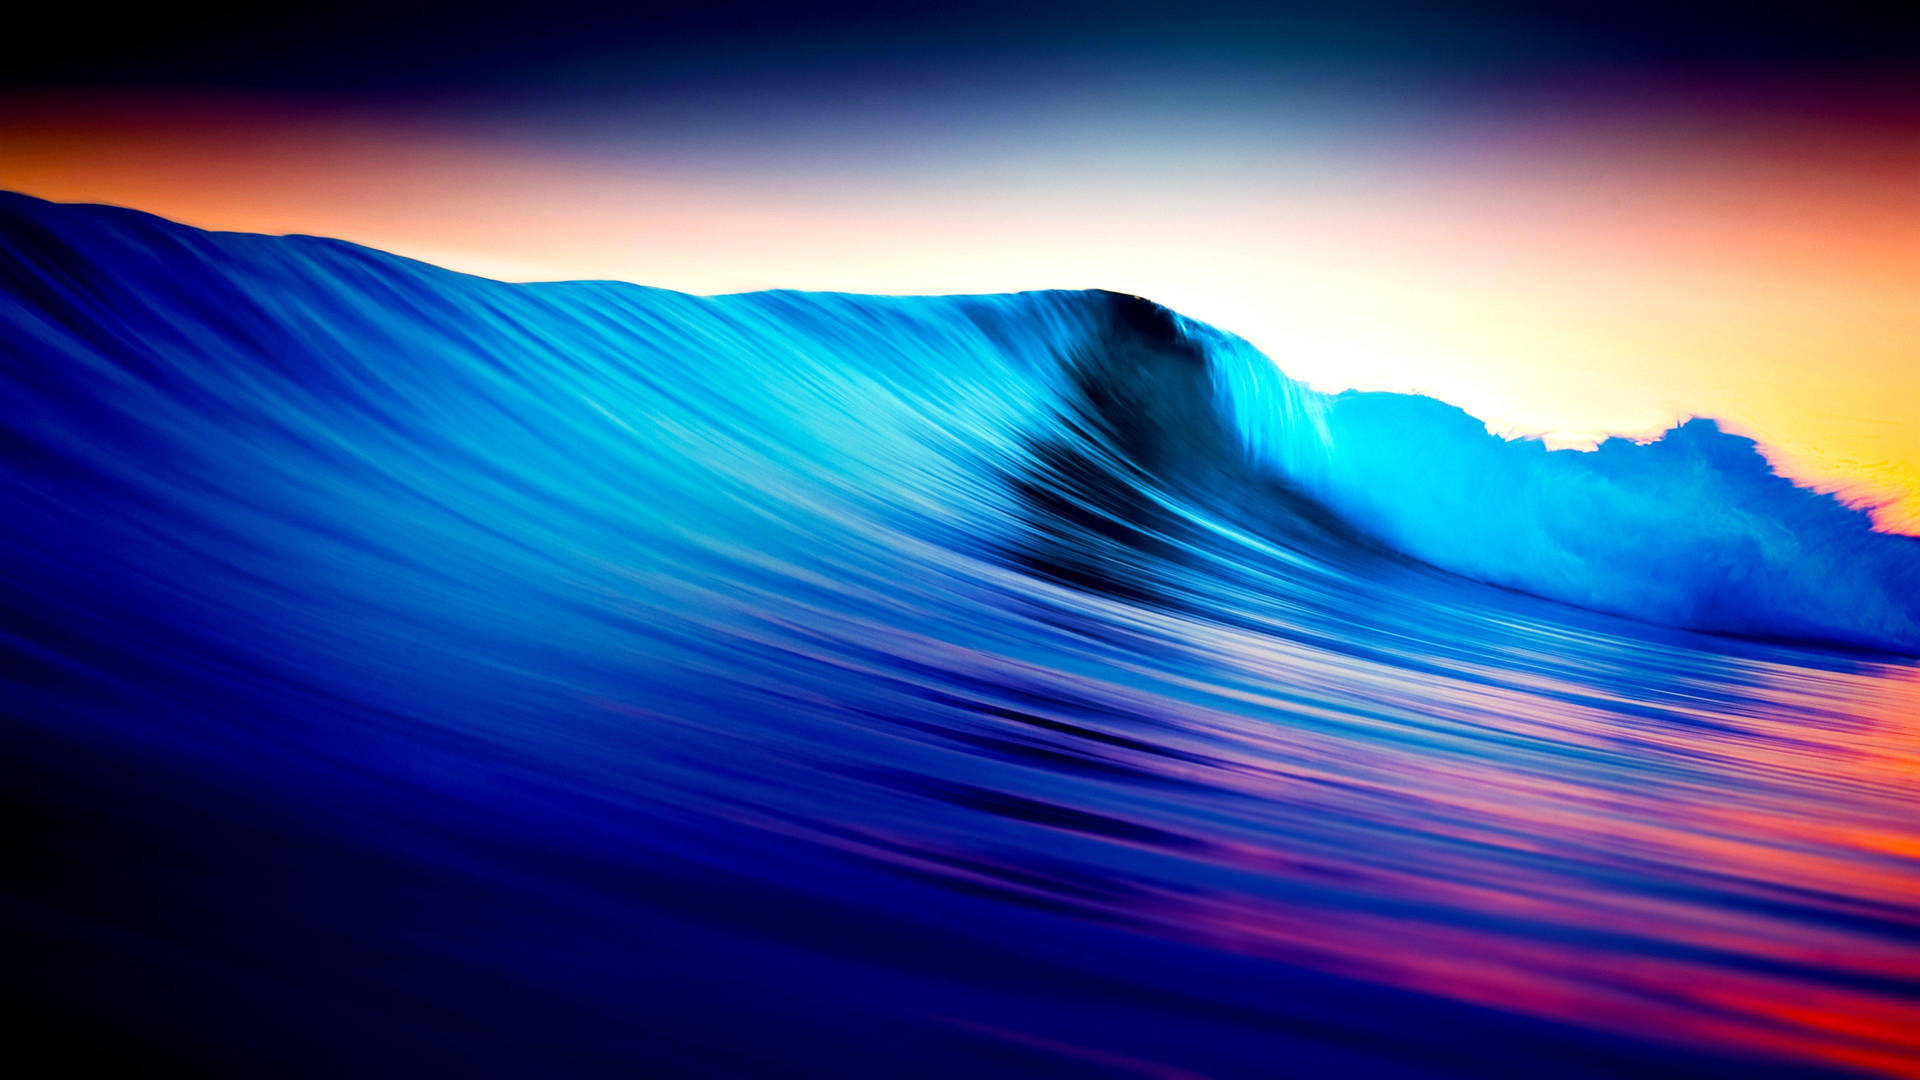 Neon Blue Aesthetic Waves Background